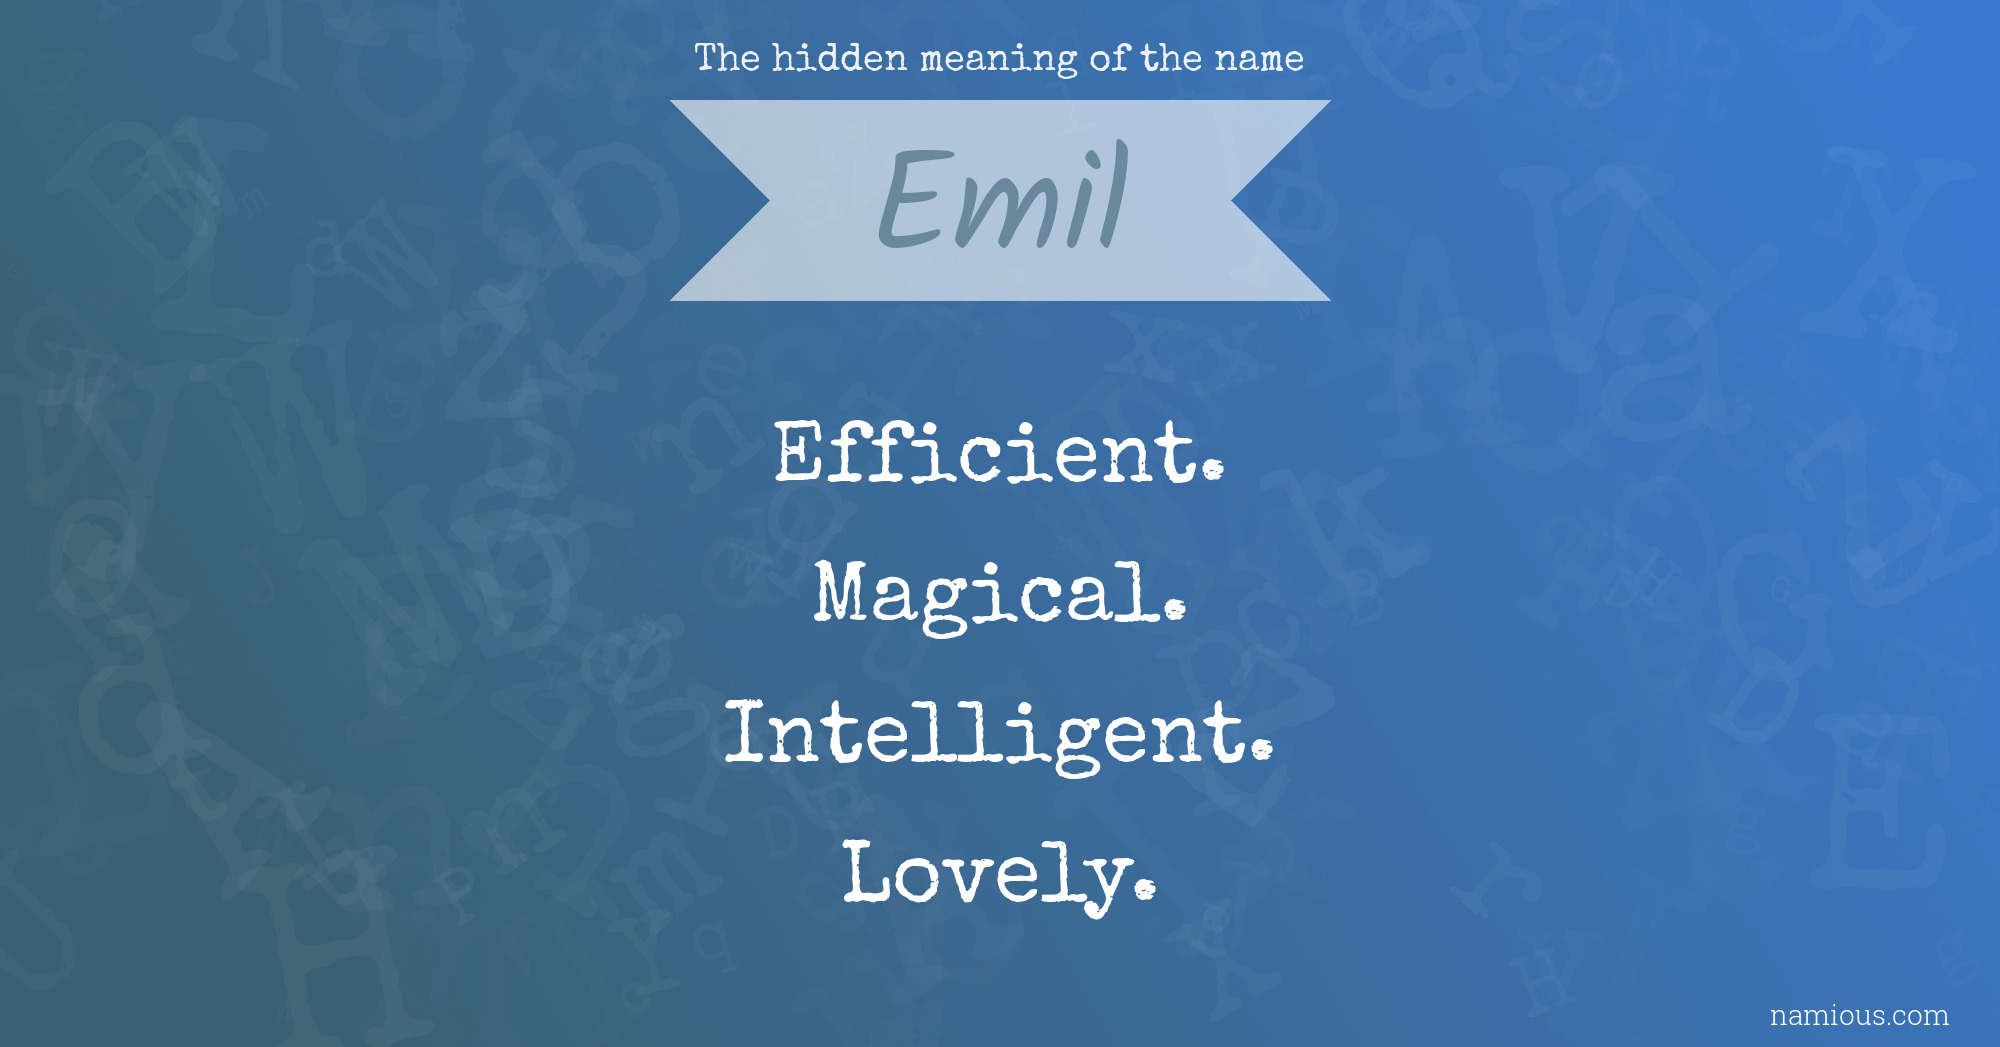 The hidden meaning of the name Emil